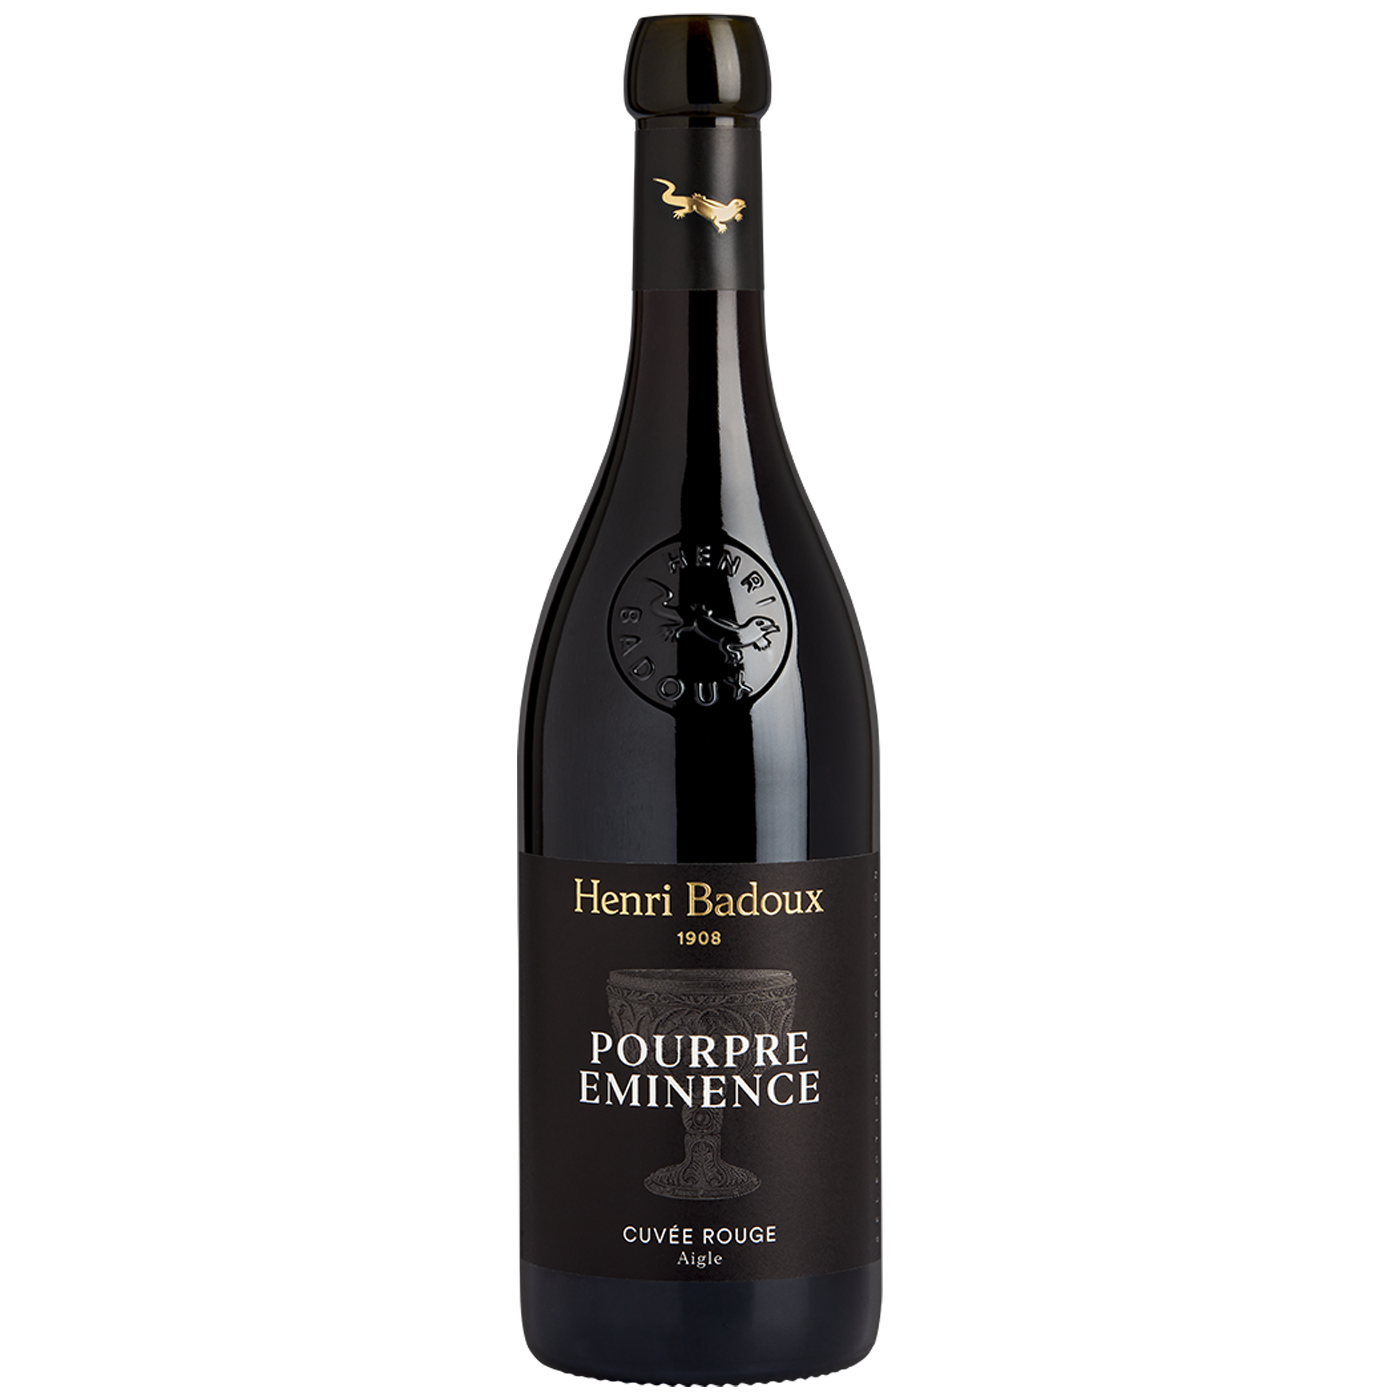 Pinot Gamay Pourpre Eminence